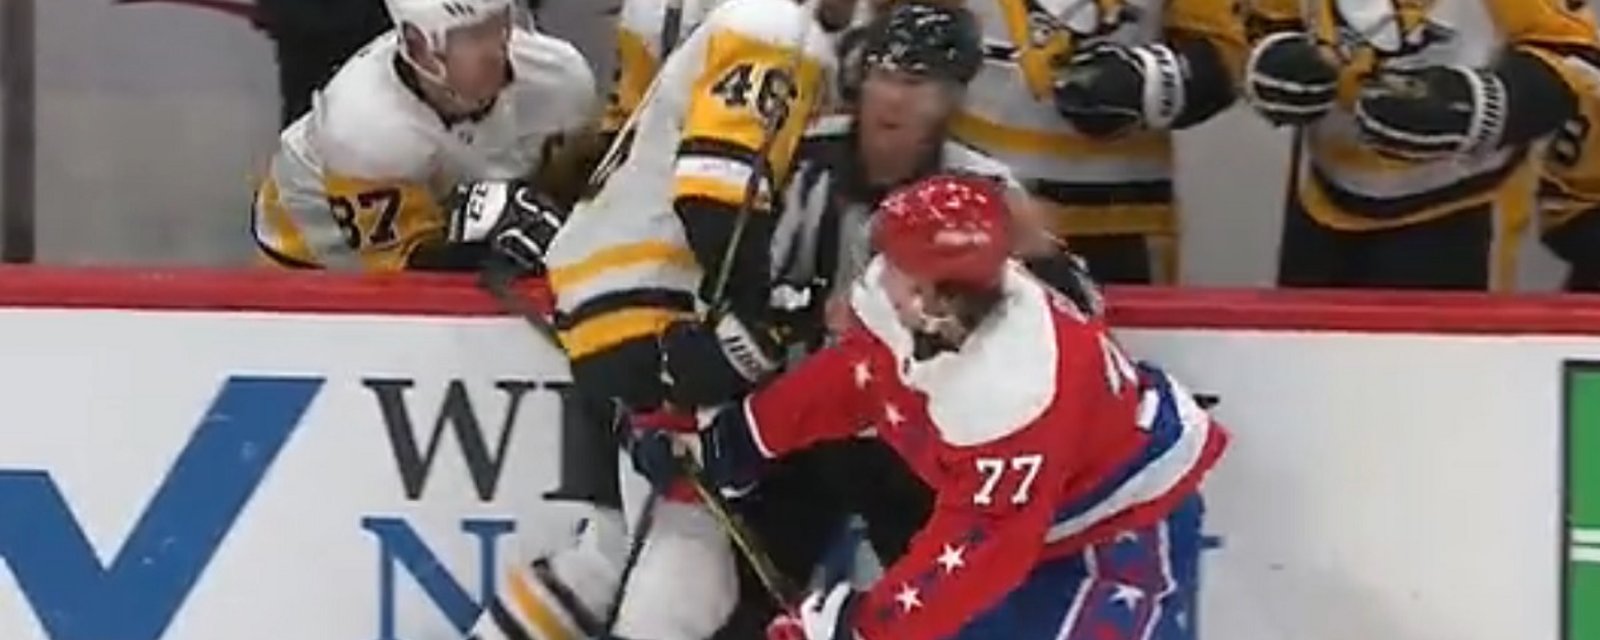 Sidney Crosby calls out T.J. Oshie after bench incident on Saturday.